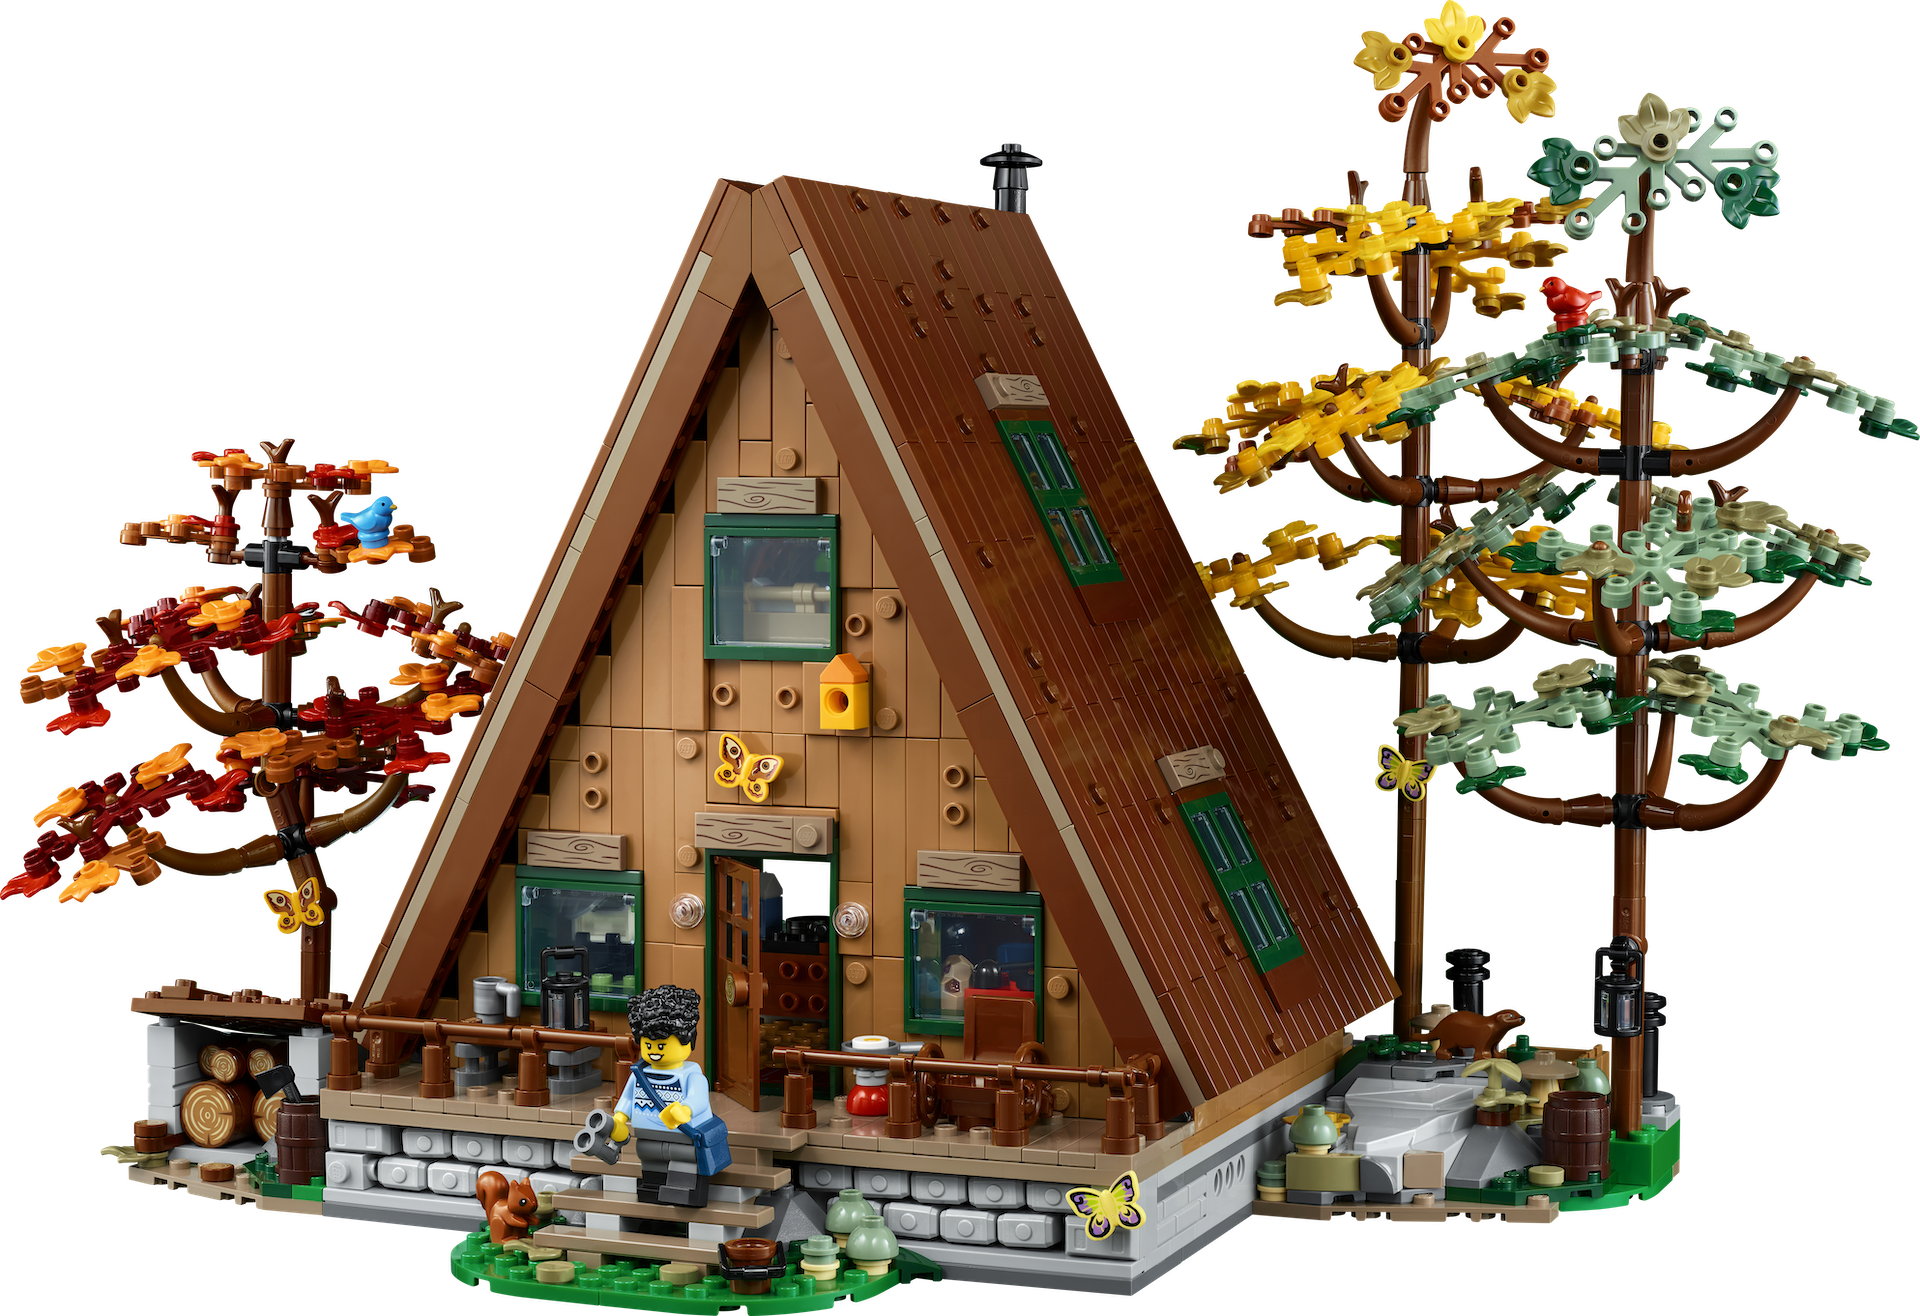 LEGO Ideas project in review pairs with 21338 A-Frame Cabin